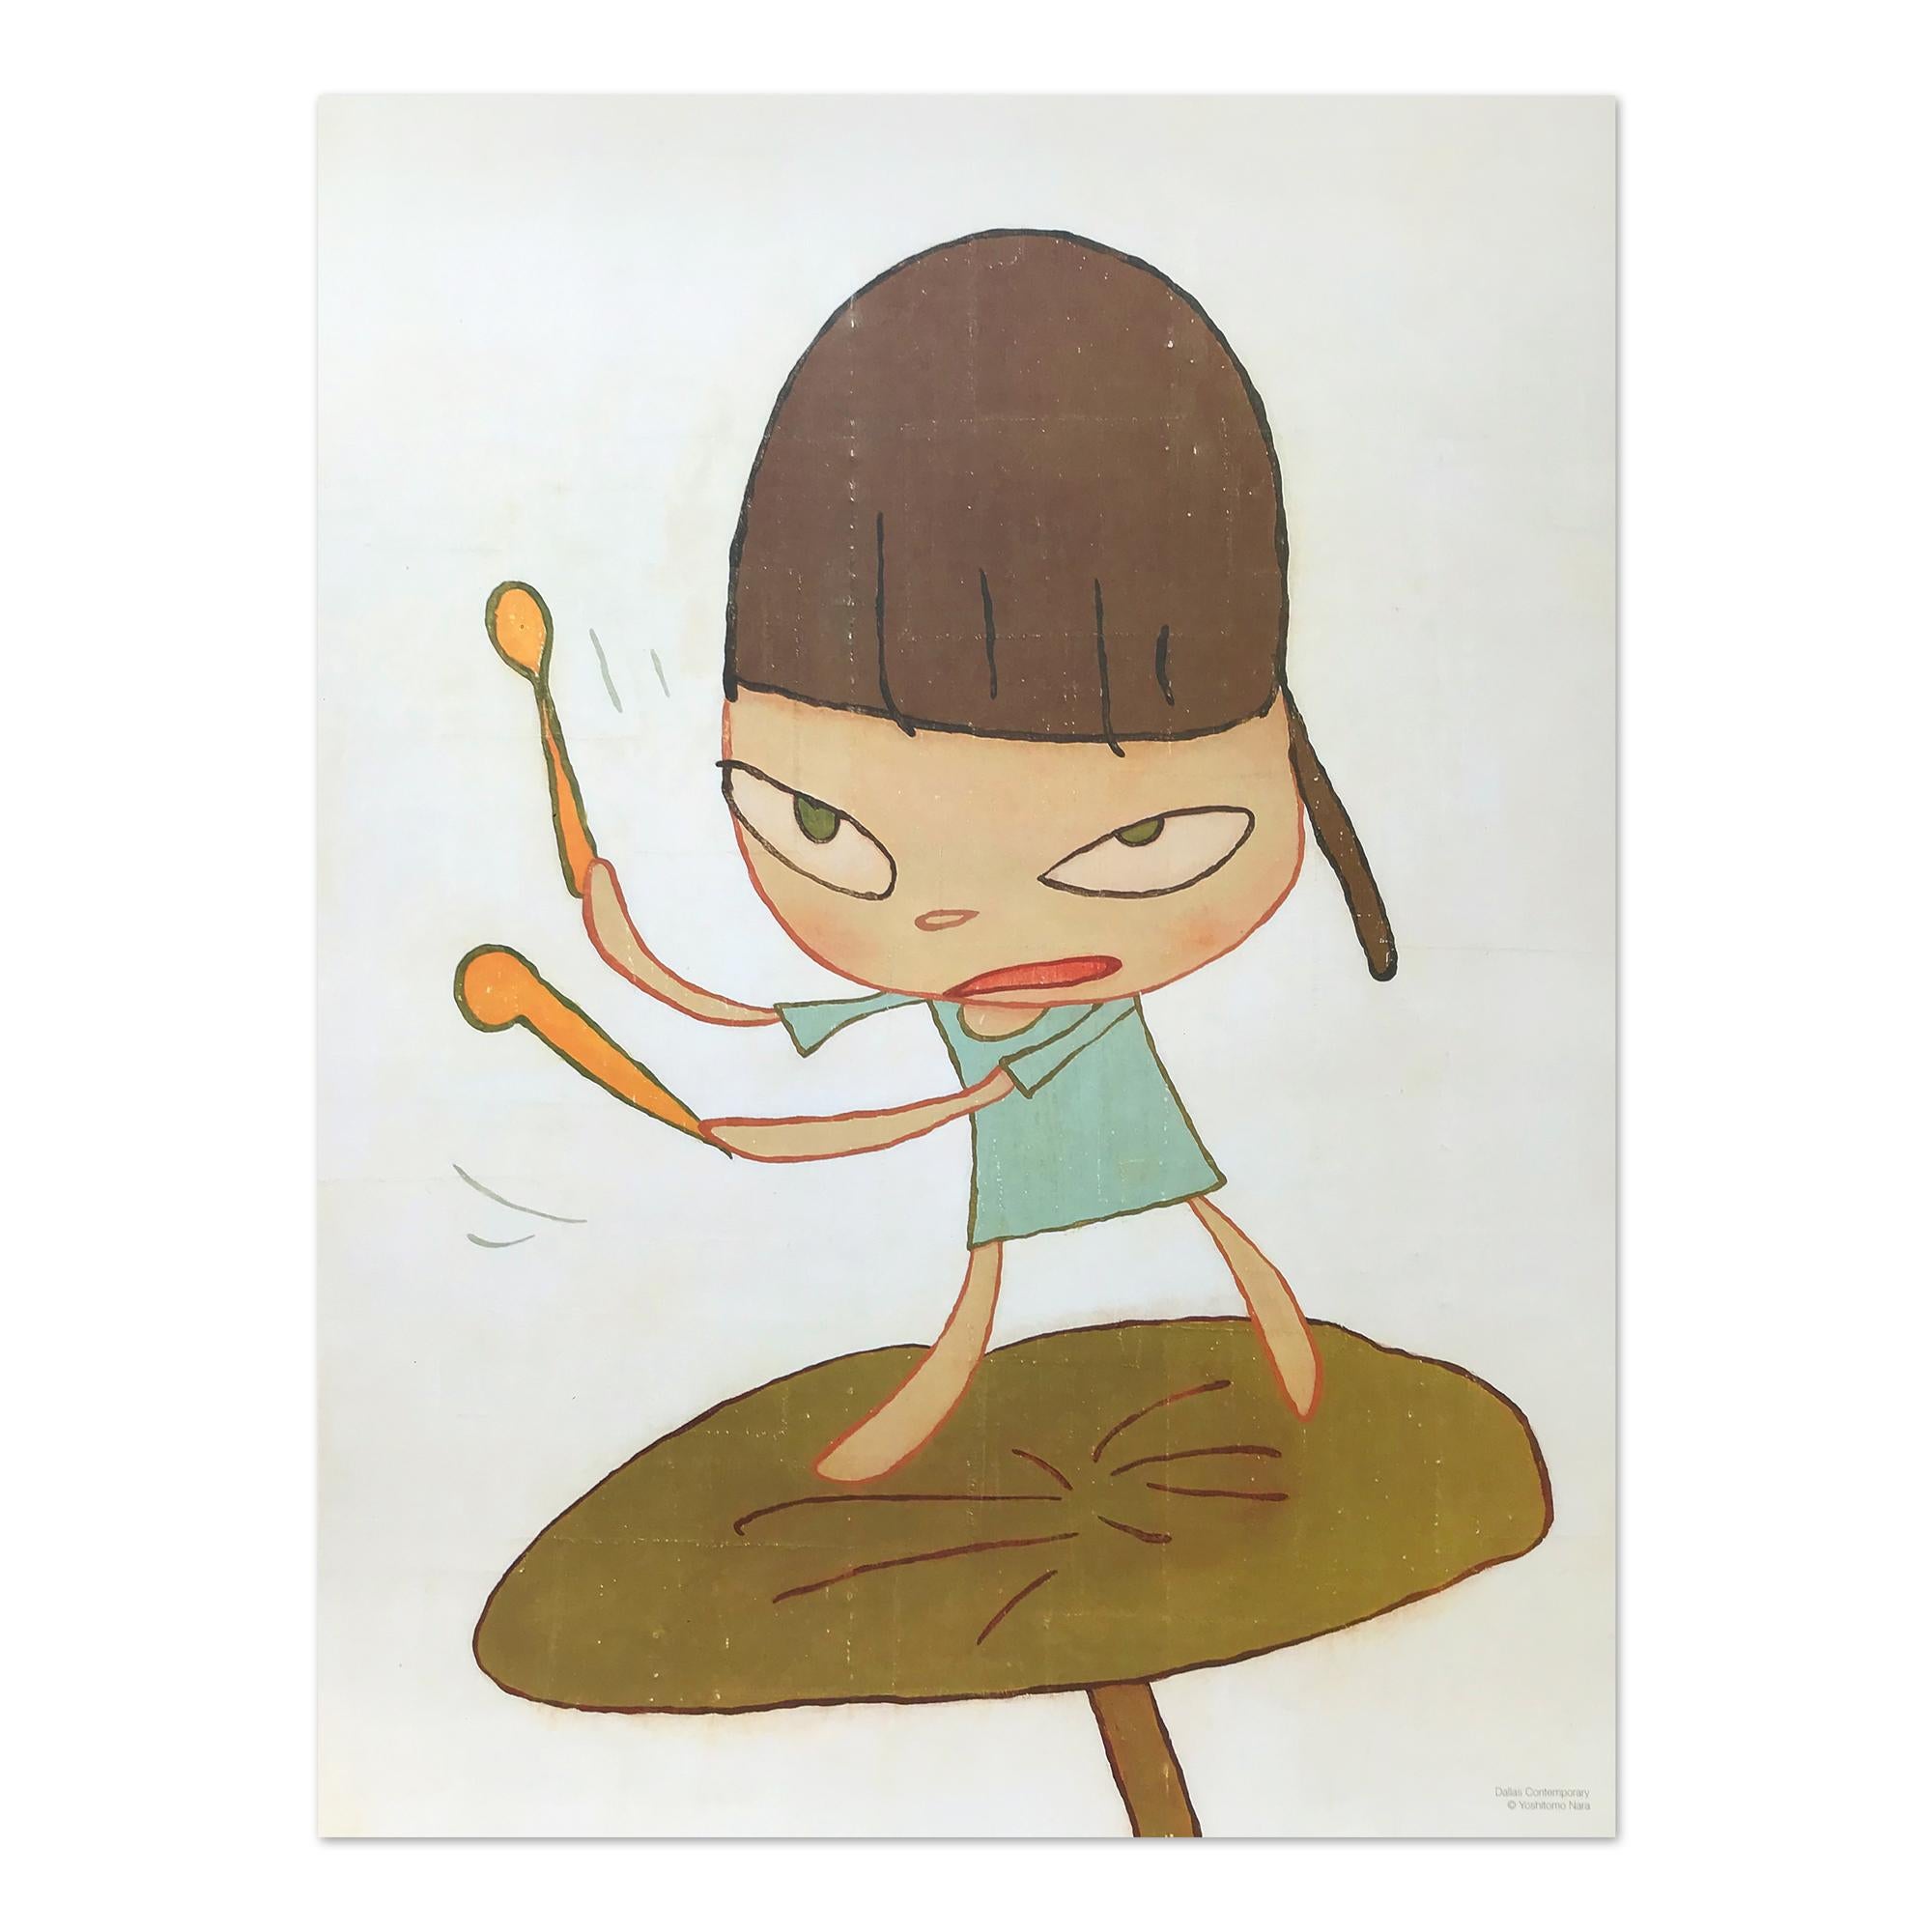 Yoshitomo Nara (1959, Japanese)
Marching on a Butterbur Leaf, 2019
Medium: Offset print on archival quality paper (incl. 5 stickers, as issued)
Dimensions: 61 × 45.7 cm (24 × 18 in)
Original edition of 1000: Not signed, not numbered, incl. 5